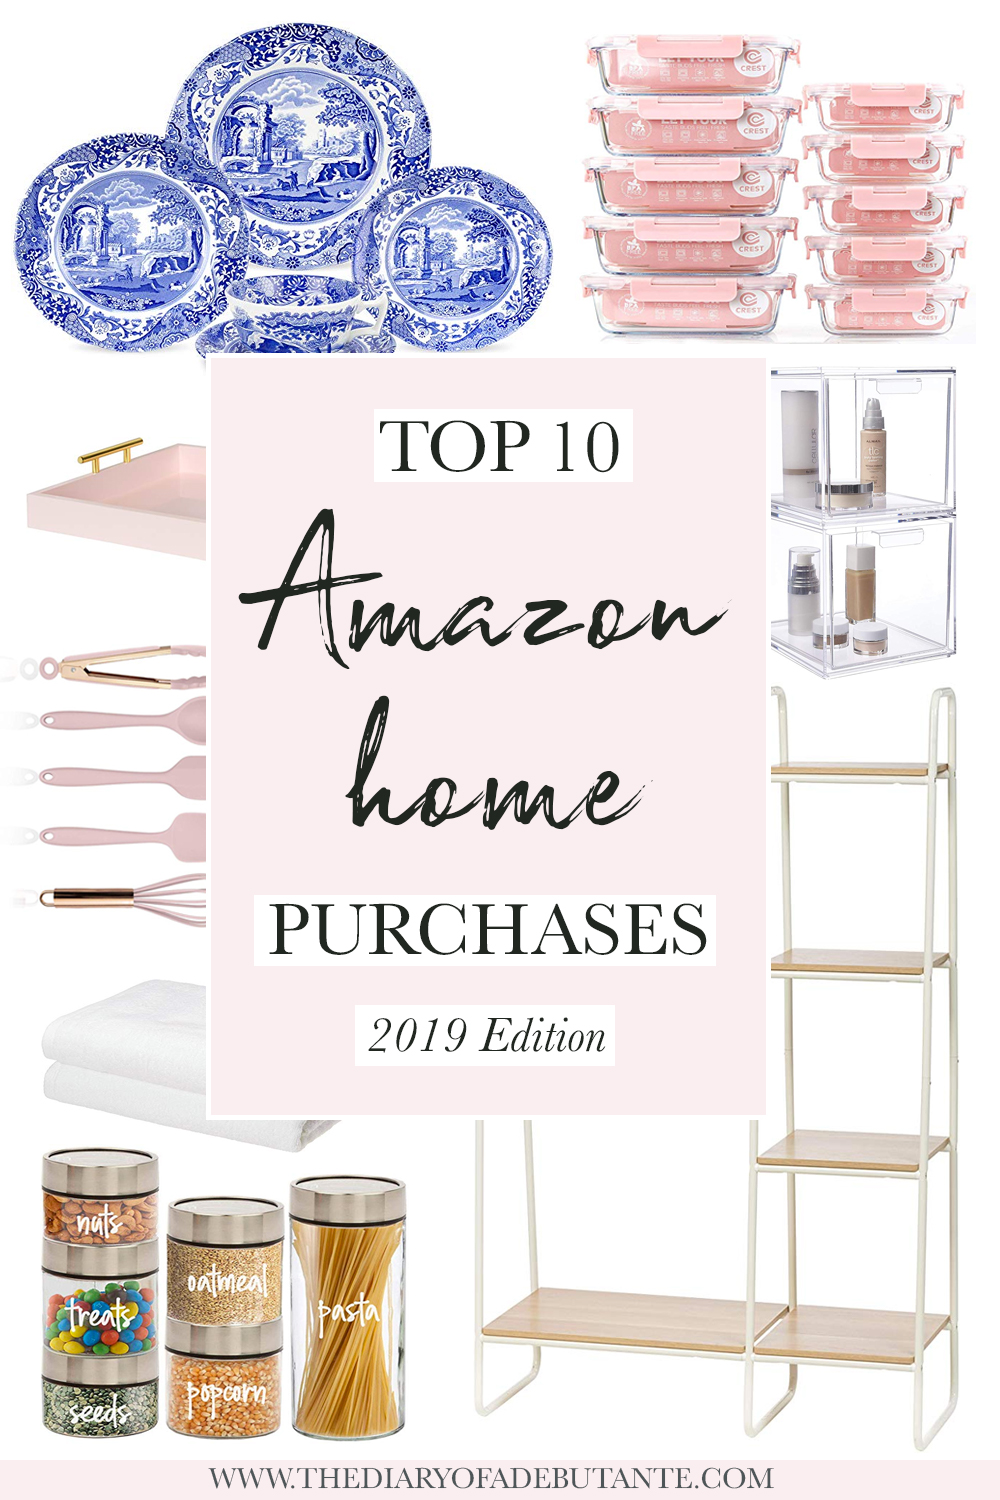 Best Amazon Home Products of 2019, Favorite Amazon Home Purchases of 2019, Best Things to Buy on Amazon, popular southern lifestyle blogger Stephanie Ziajka, popular southern lifestyle blog Diary of a Debutante